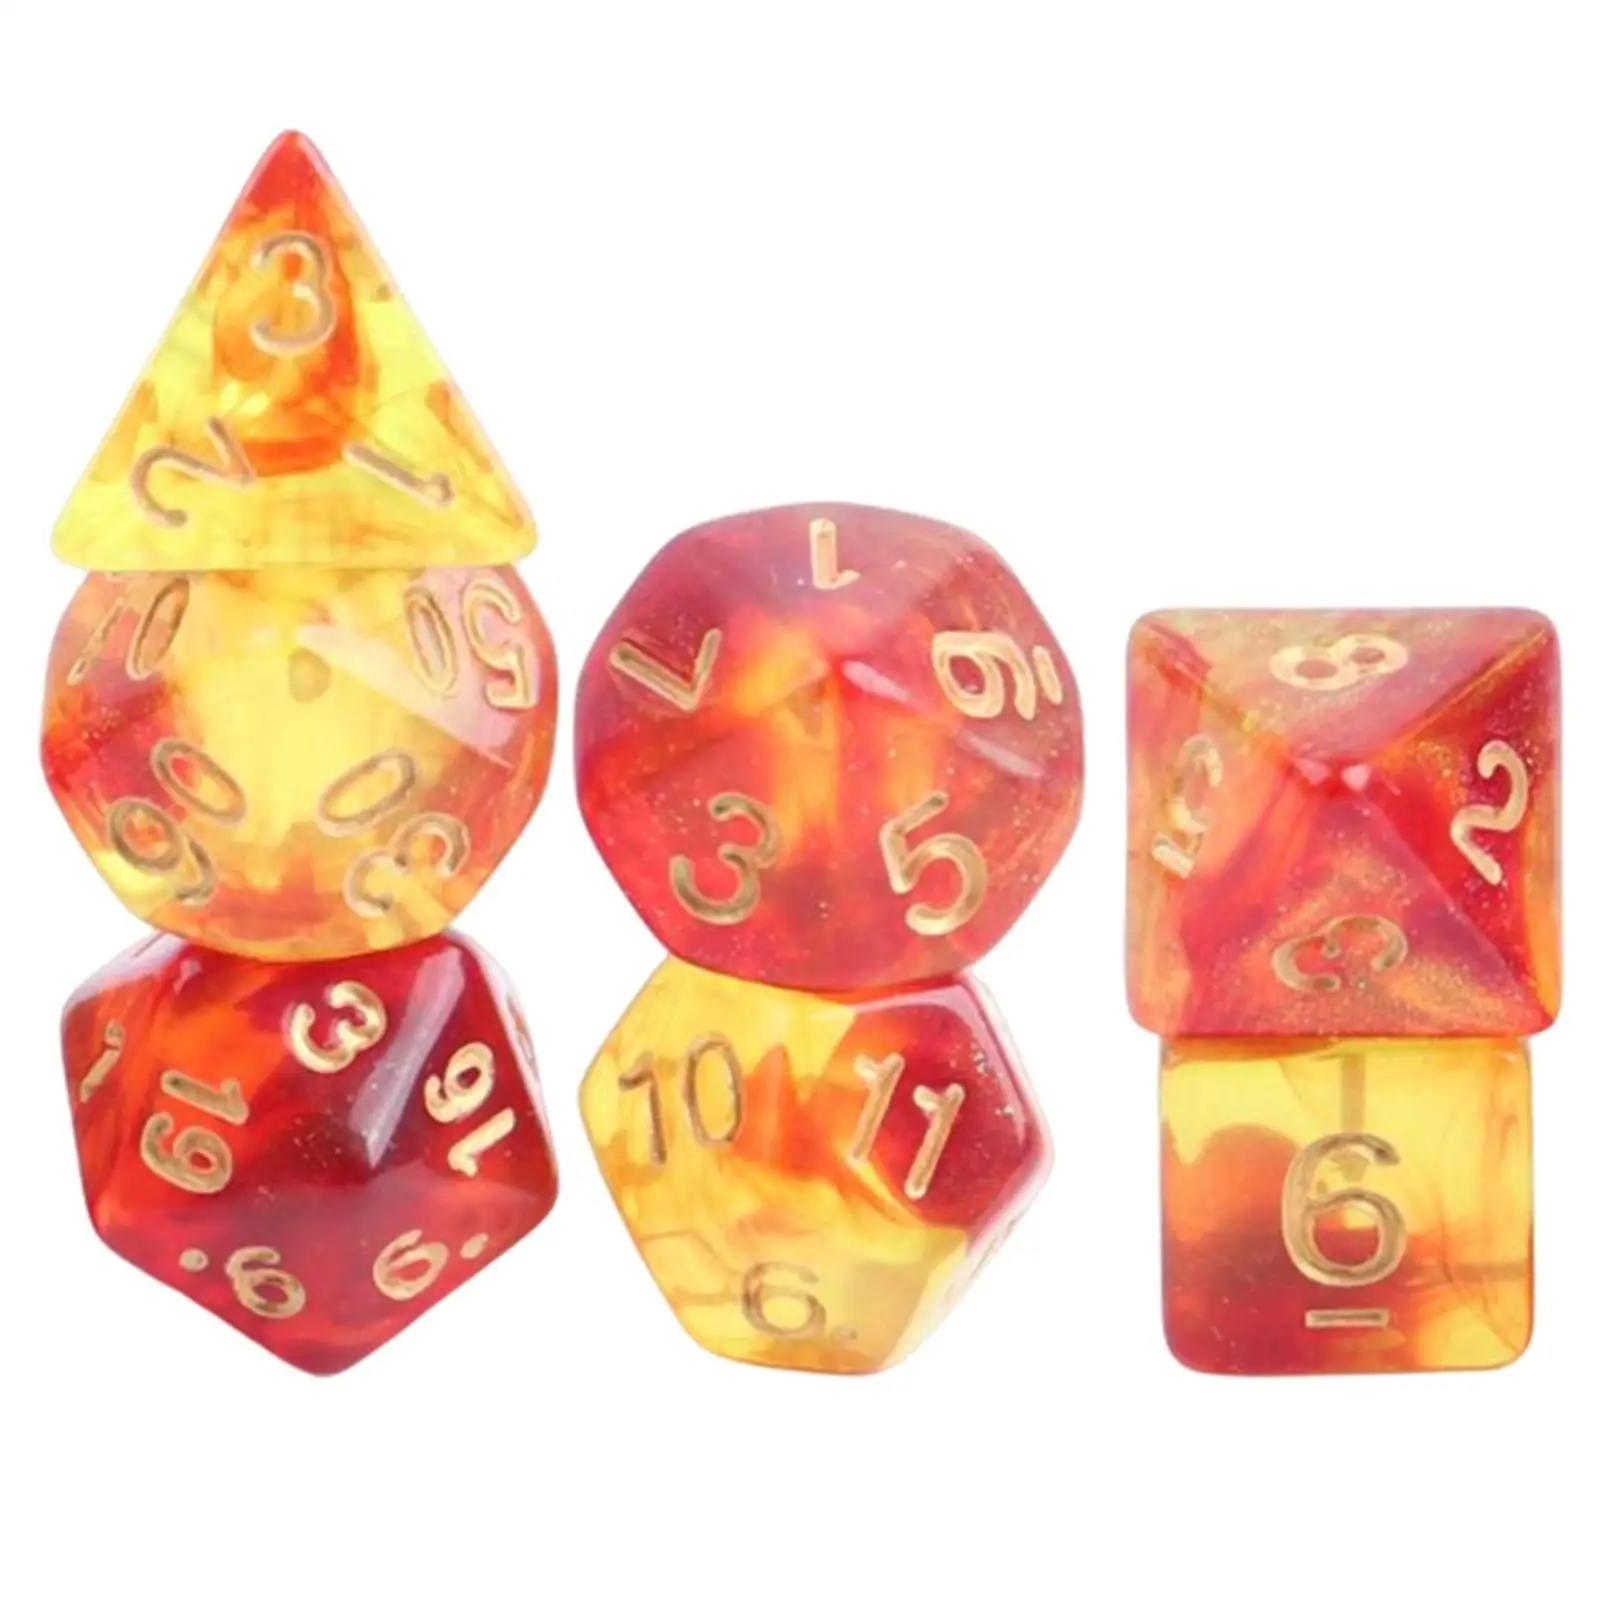 7PCS Acrylic Polyhedral Dice Set Multicolour Dice Entertainment Toys Party  Astrological   Constellation Divination Accessory 